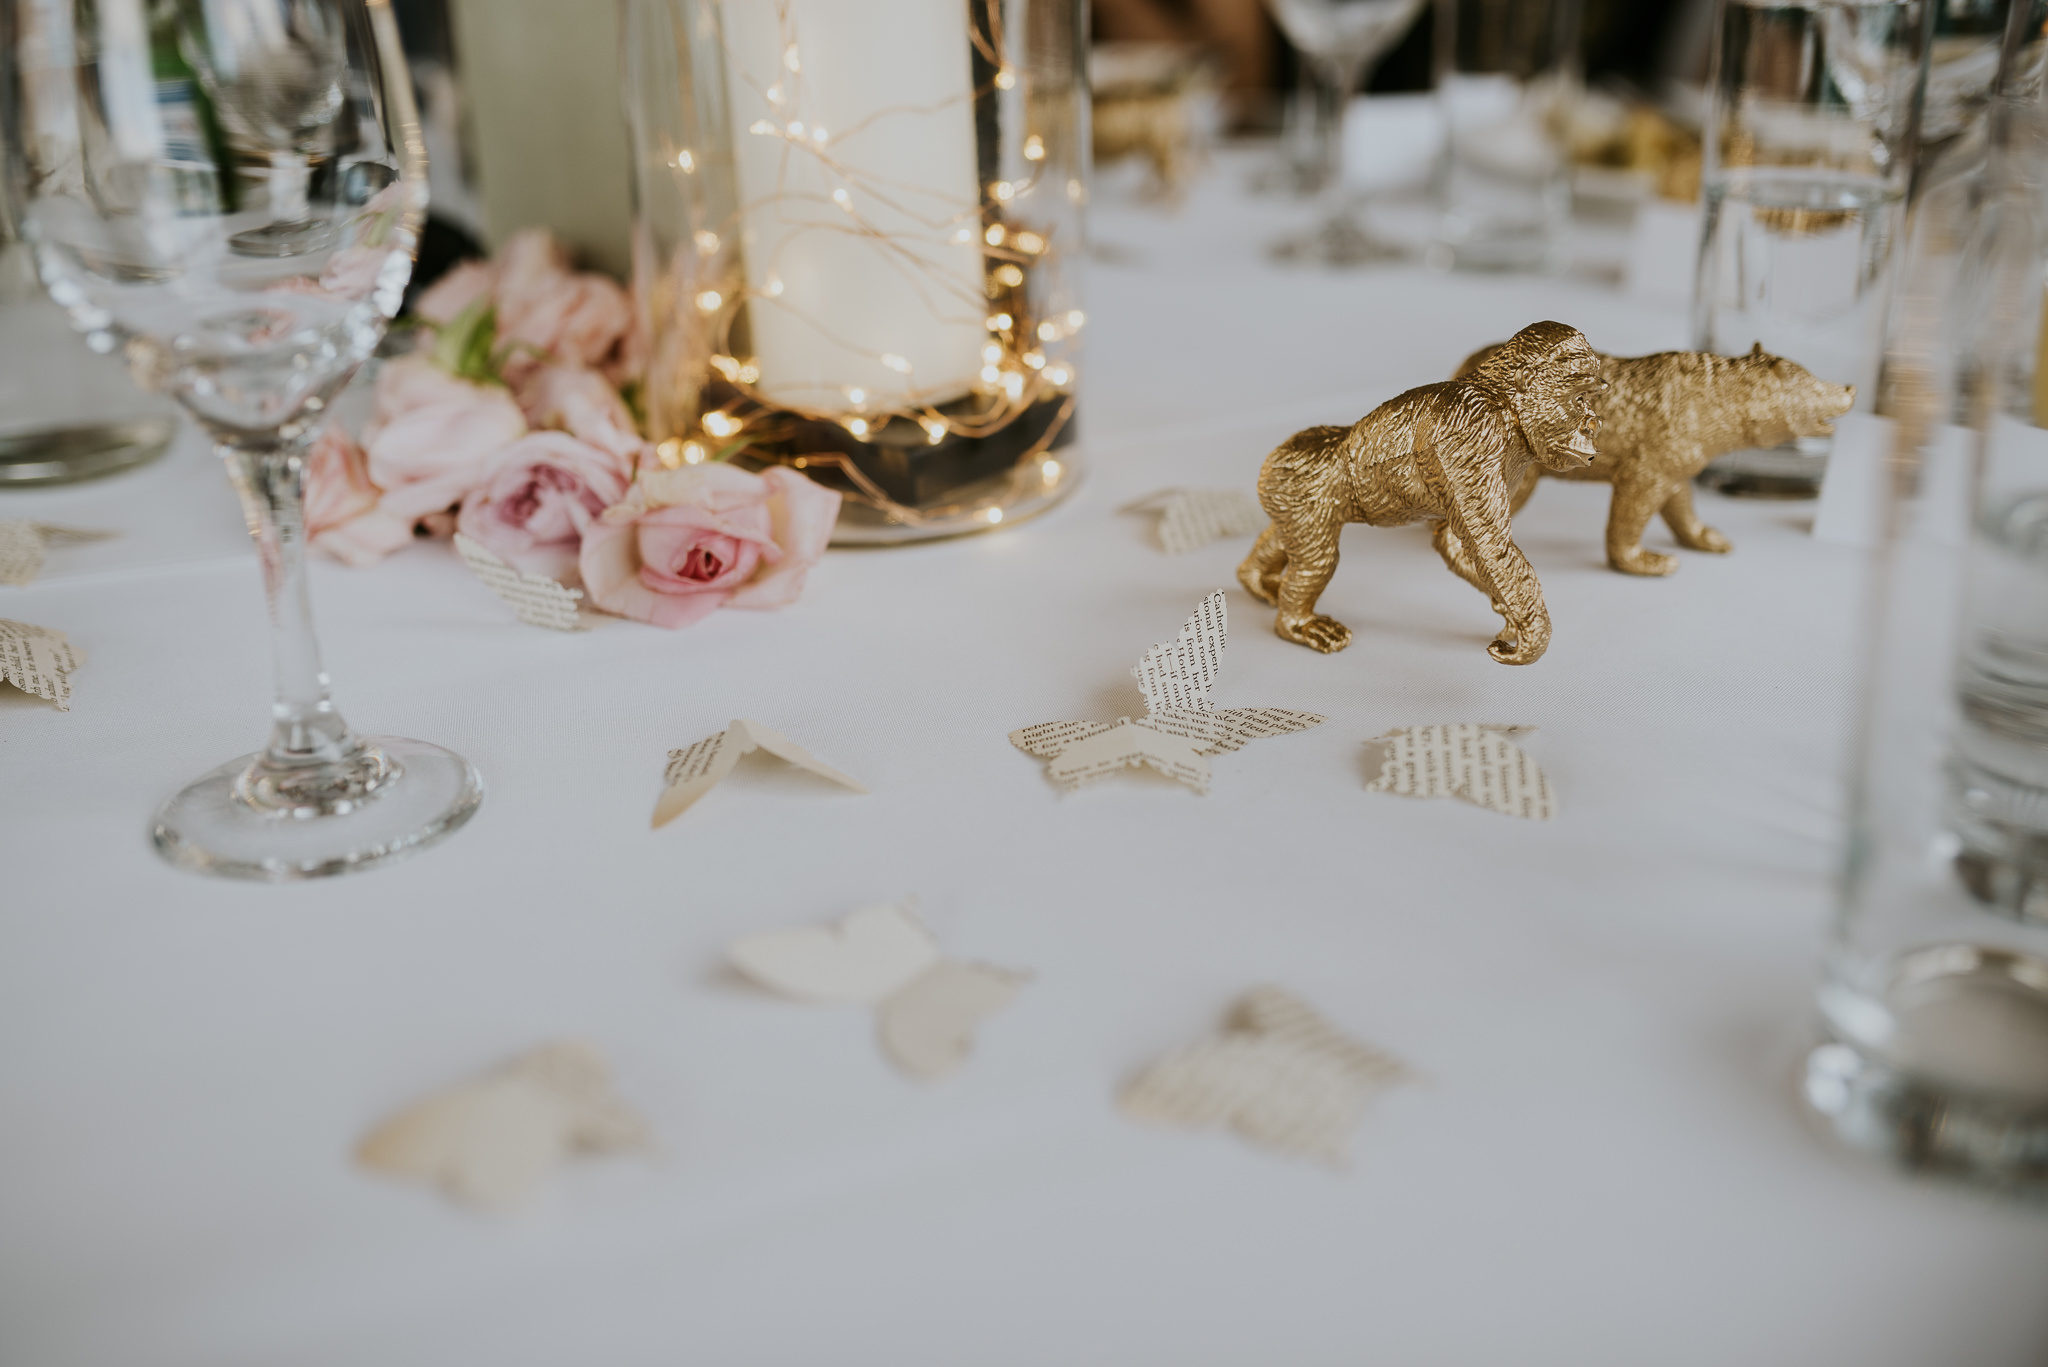 DIY Wedding Table Decorations Golden Animals and Butterflies made out of book pages